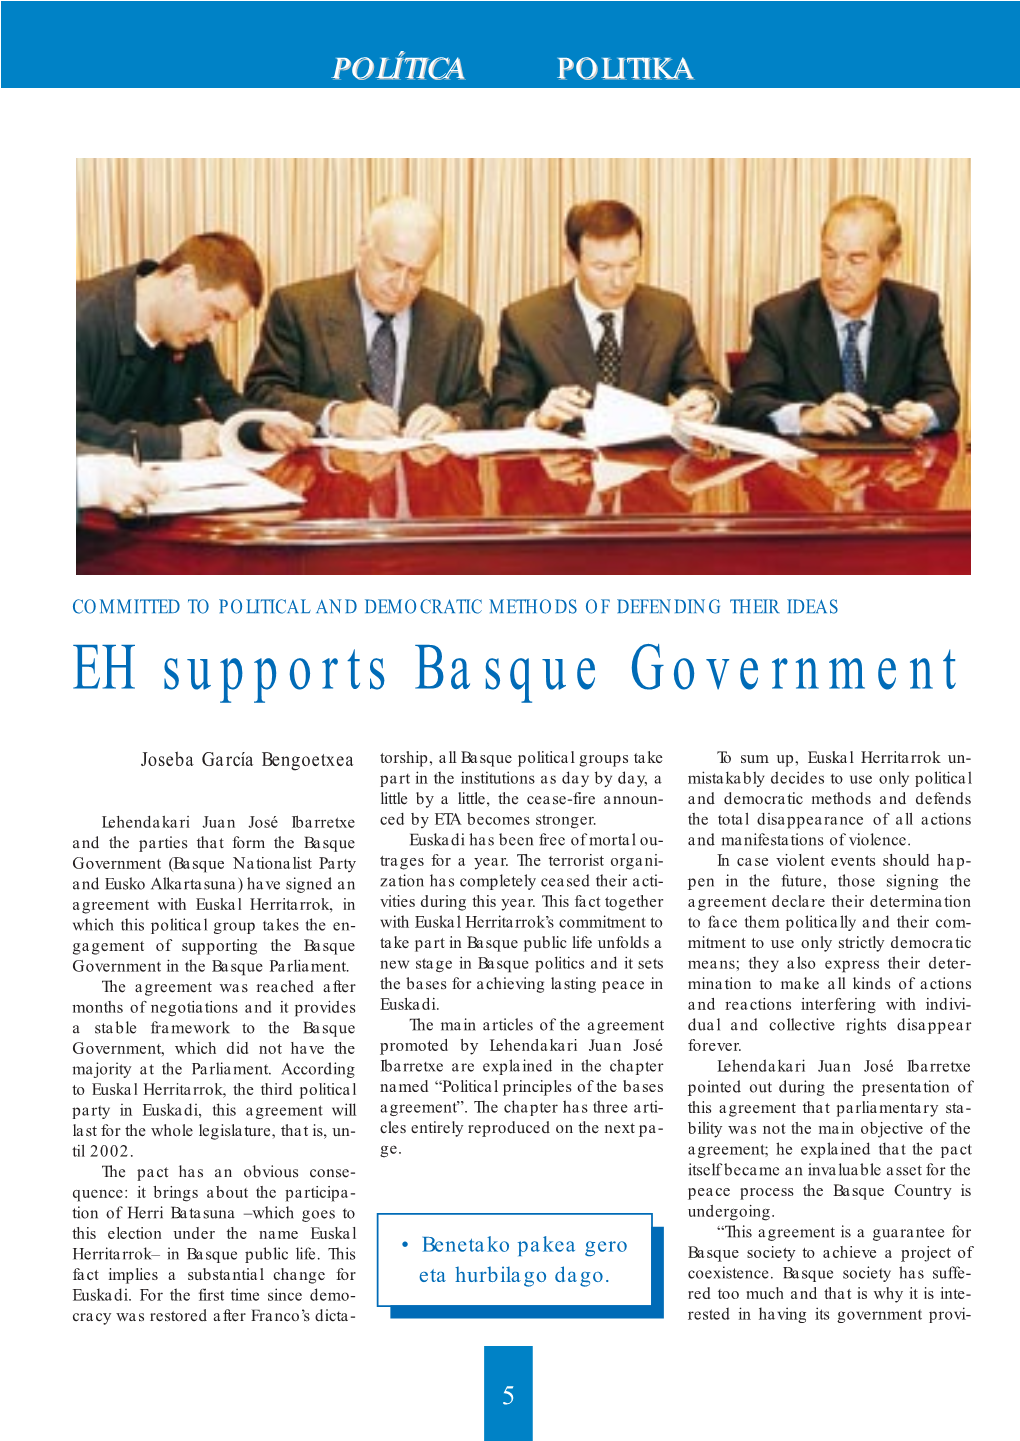 EH Supports Basque Government